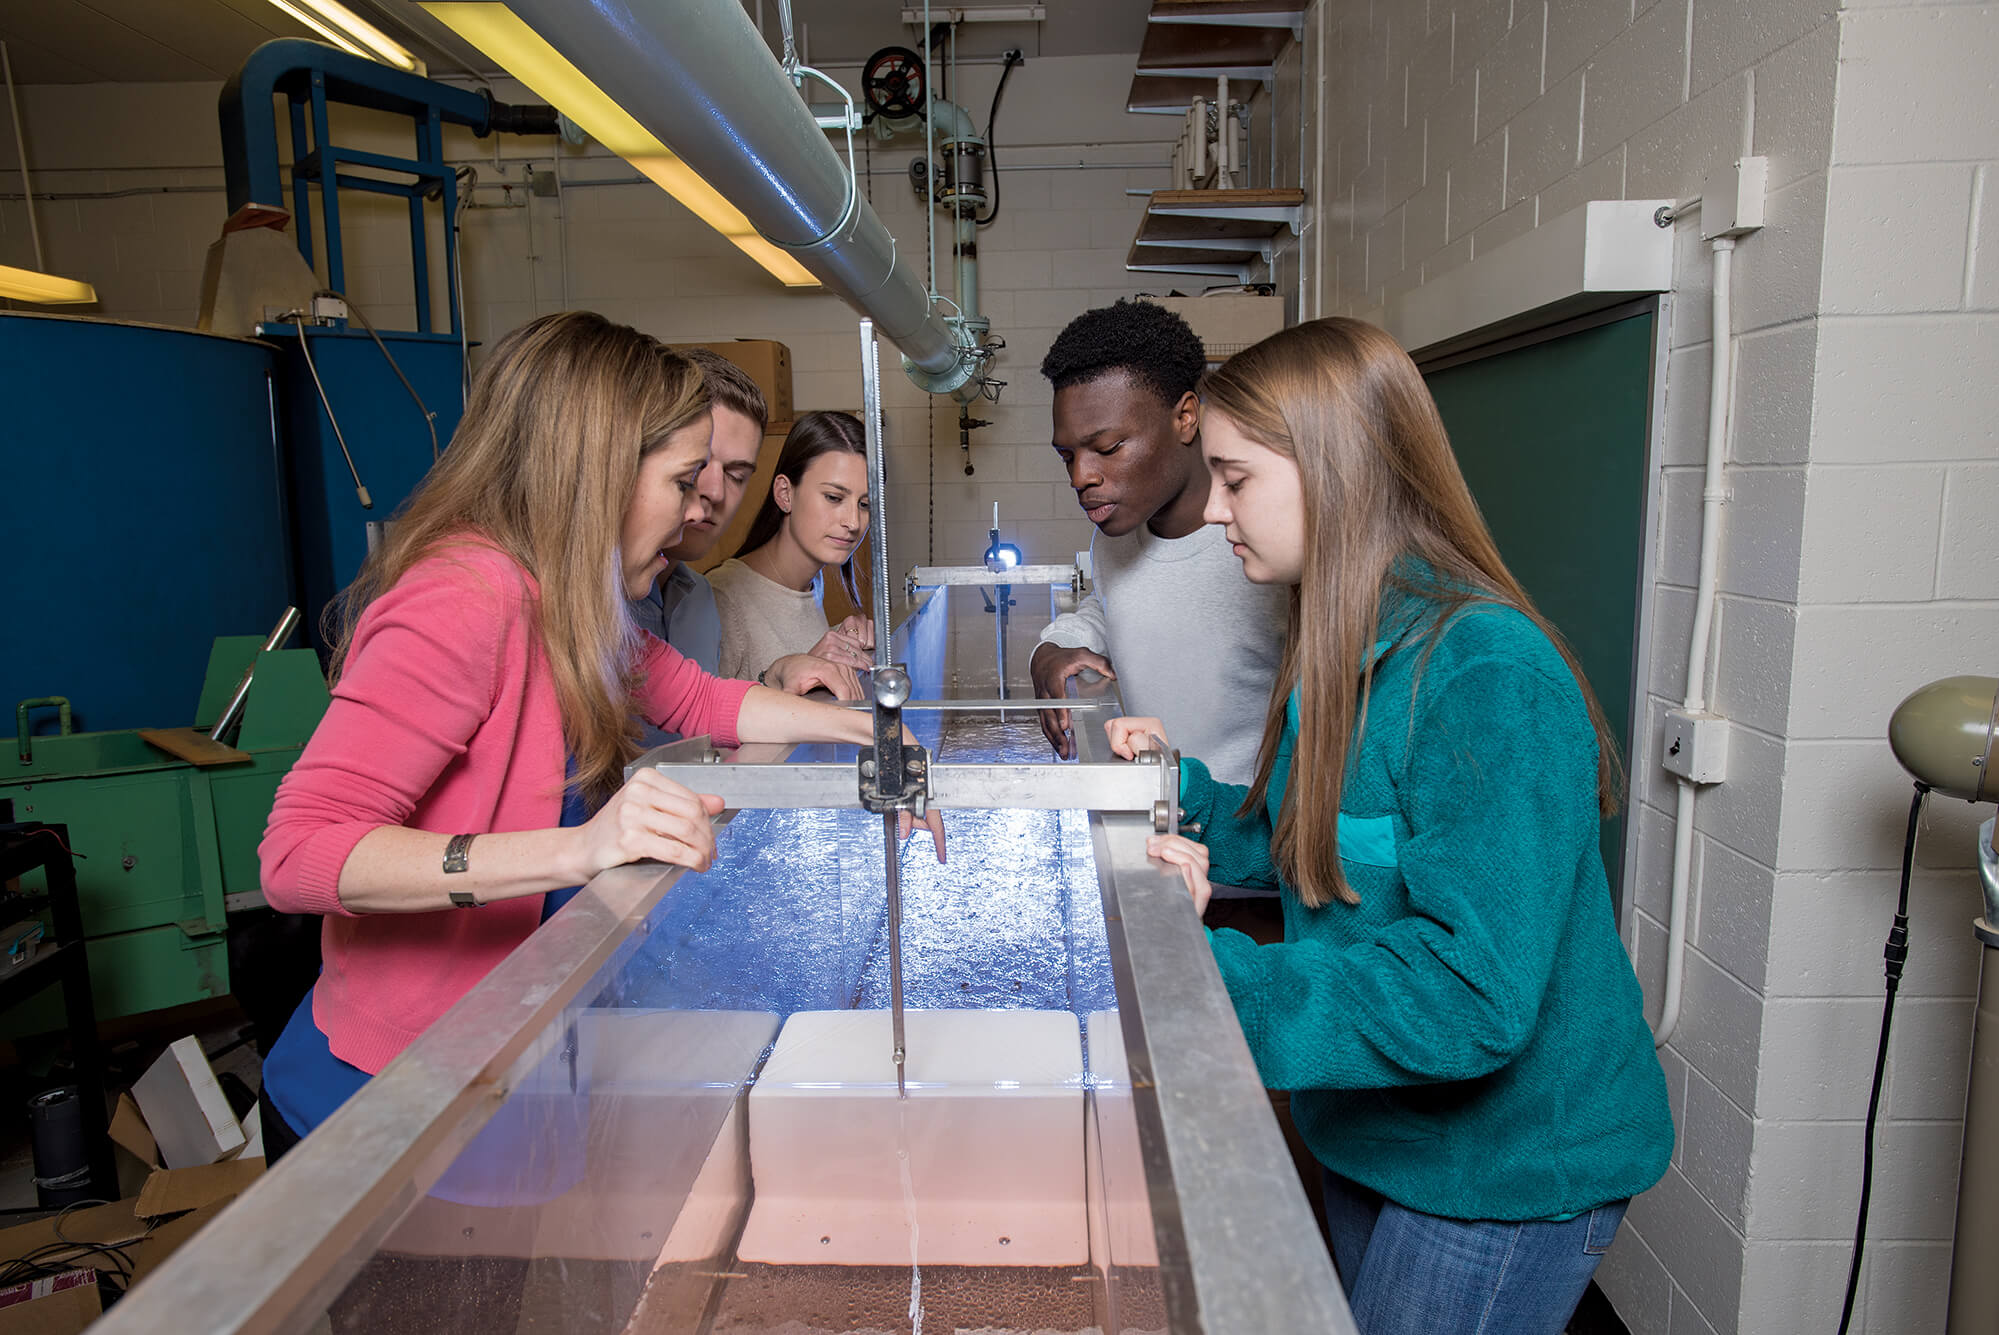 students and professor in hands-on science class